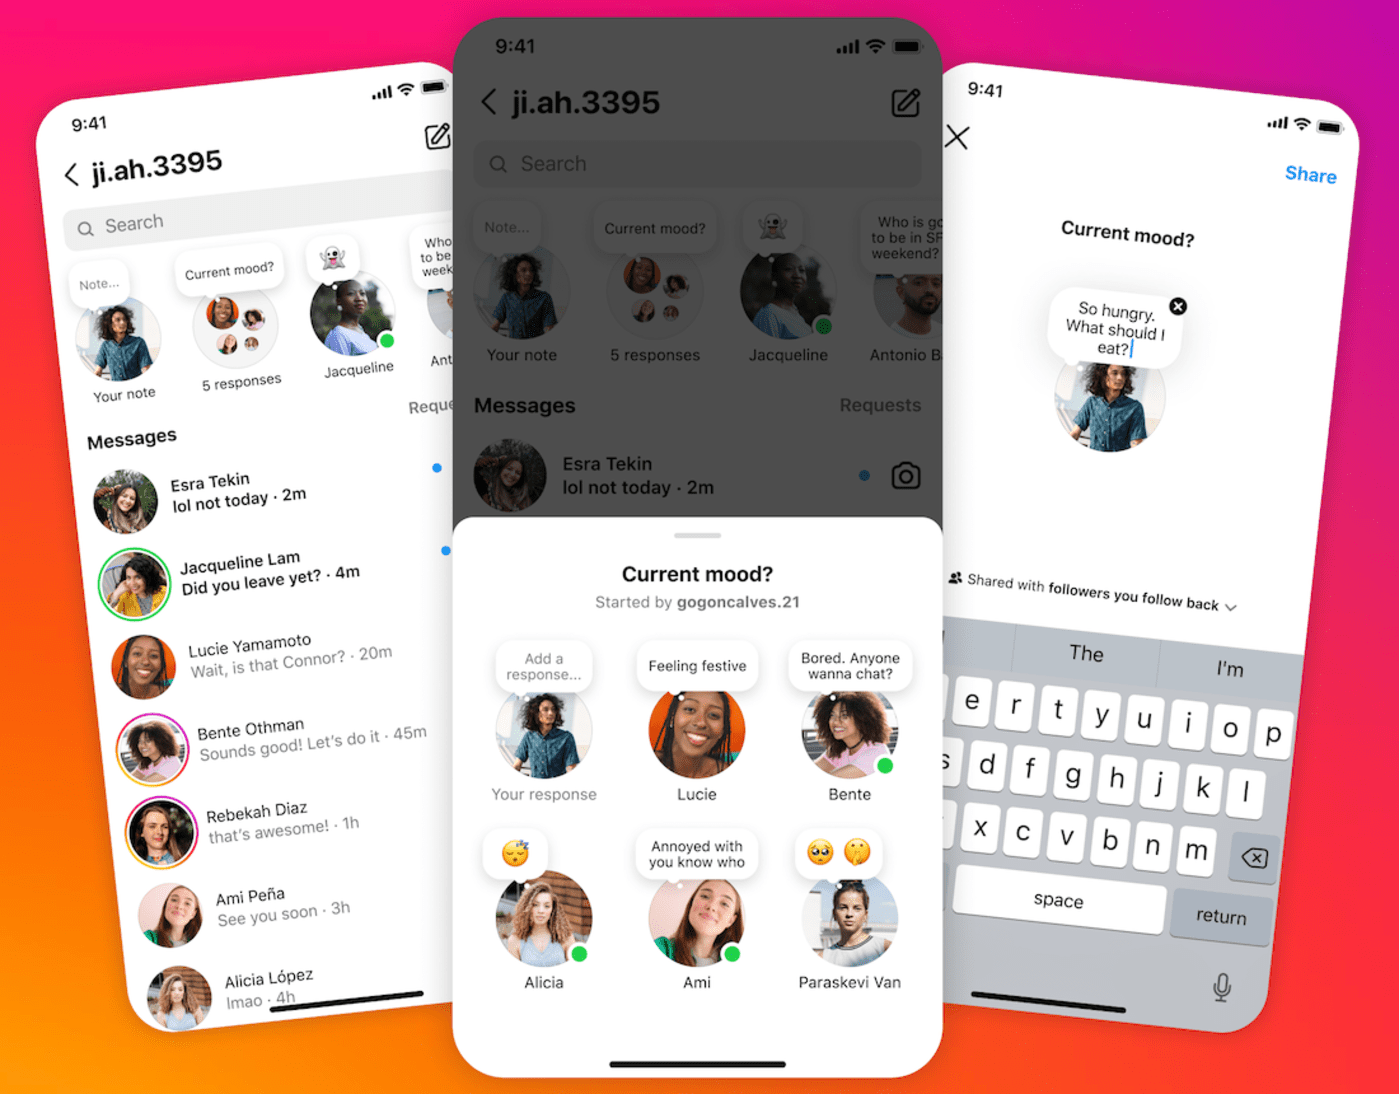 Instagram makes its status update feature more interactive